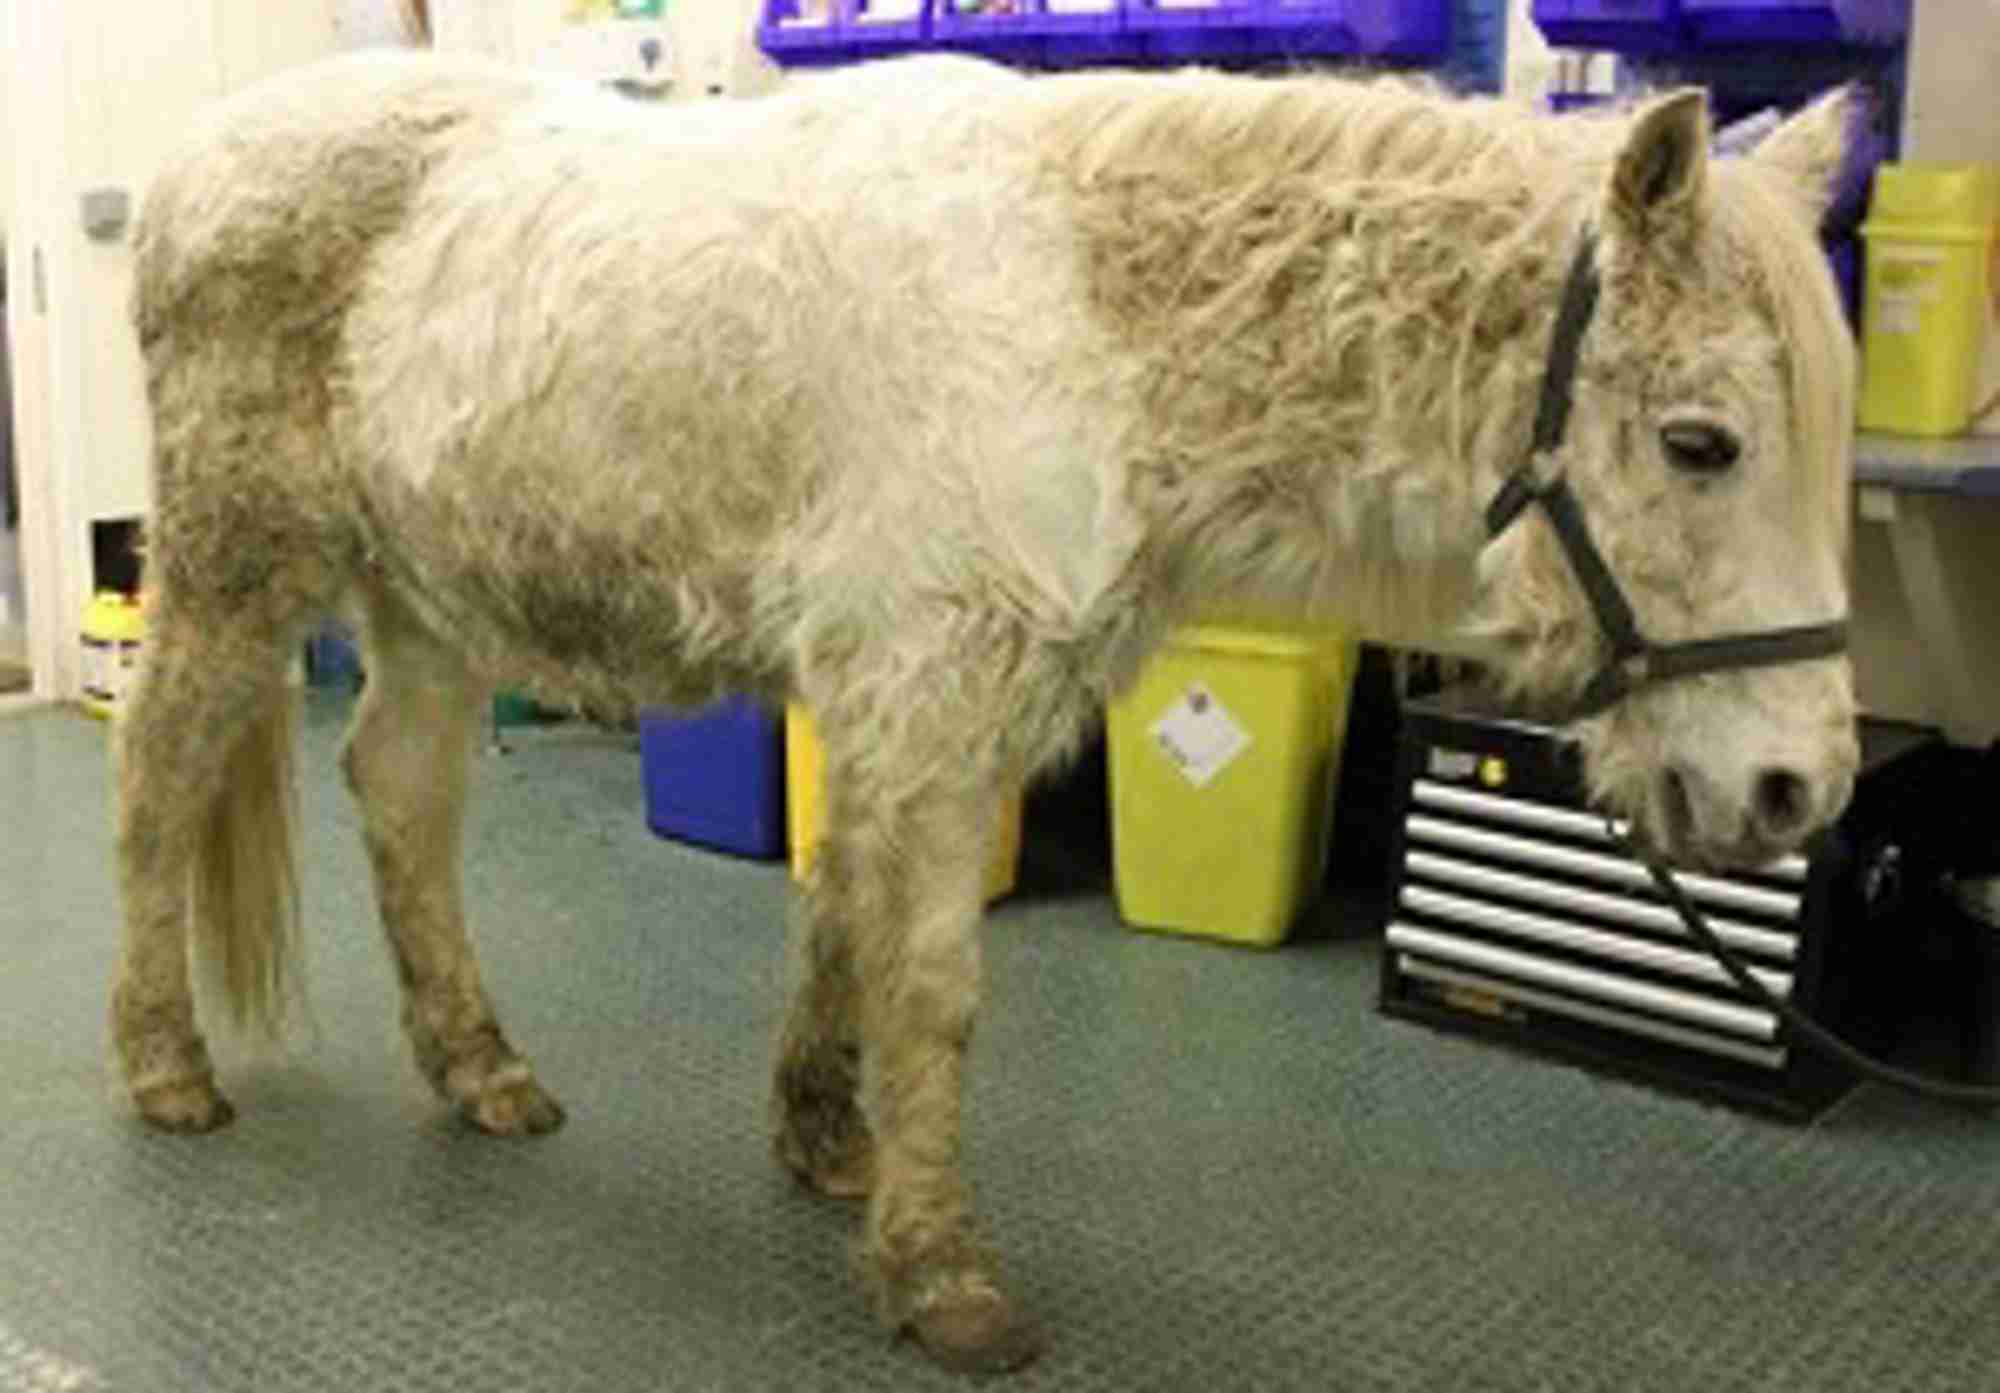 Pony with hypertrichosis. Image credit: Edd Knowles